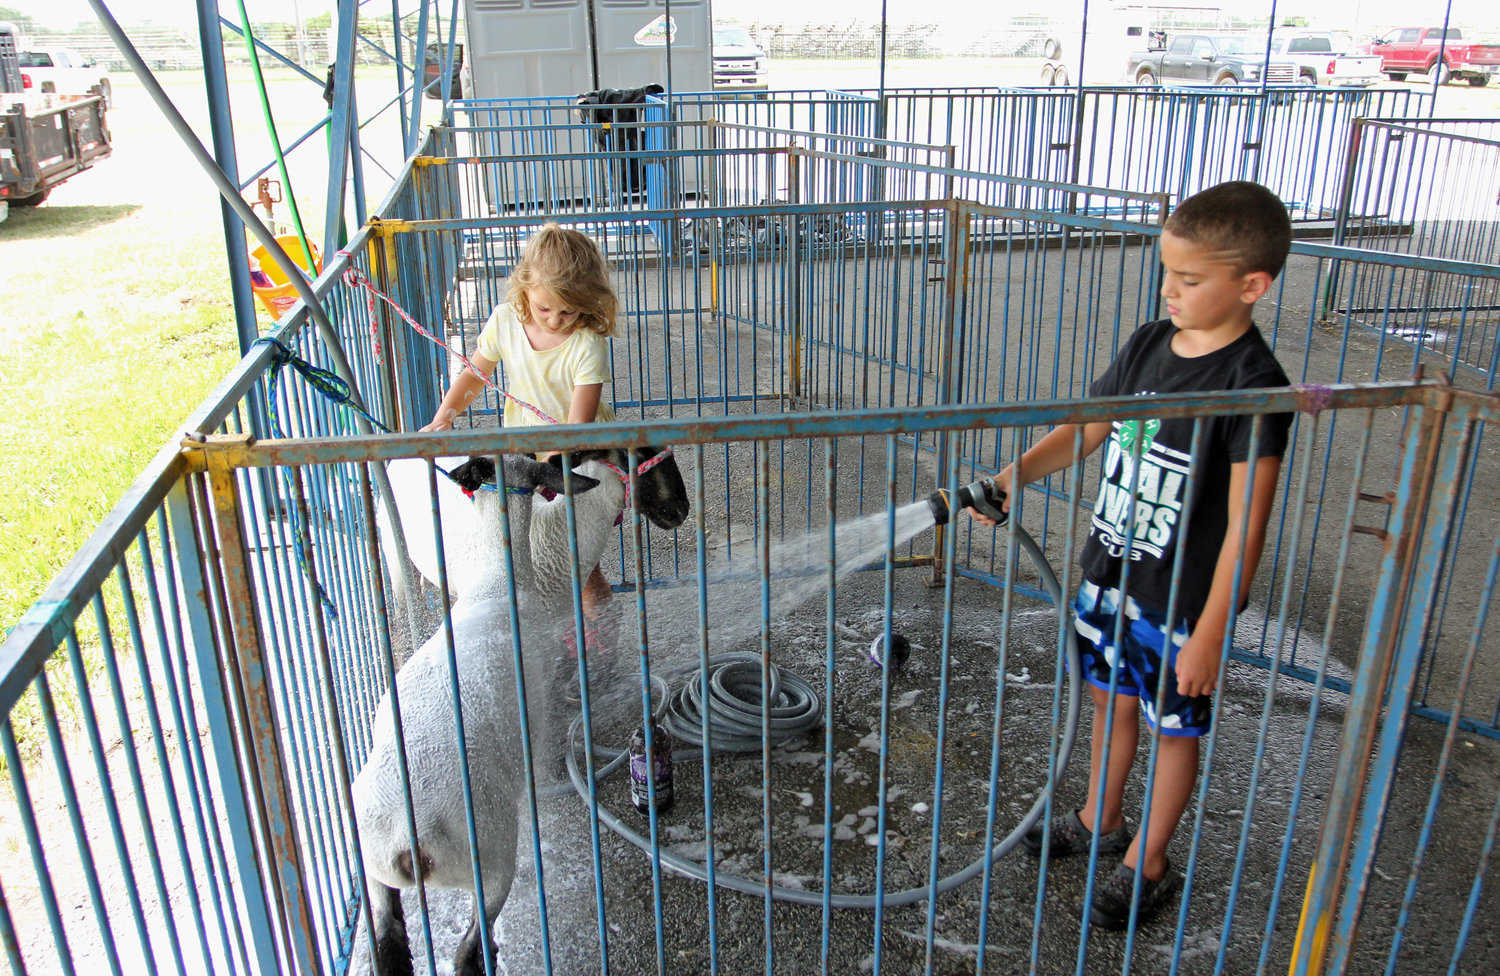 Johnson County Fair to focus on area youth StarJournal